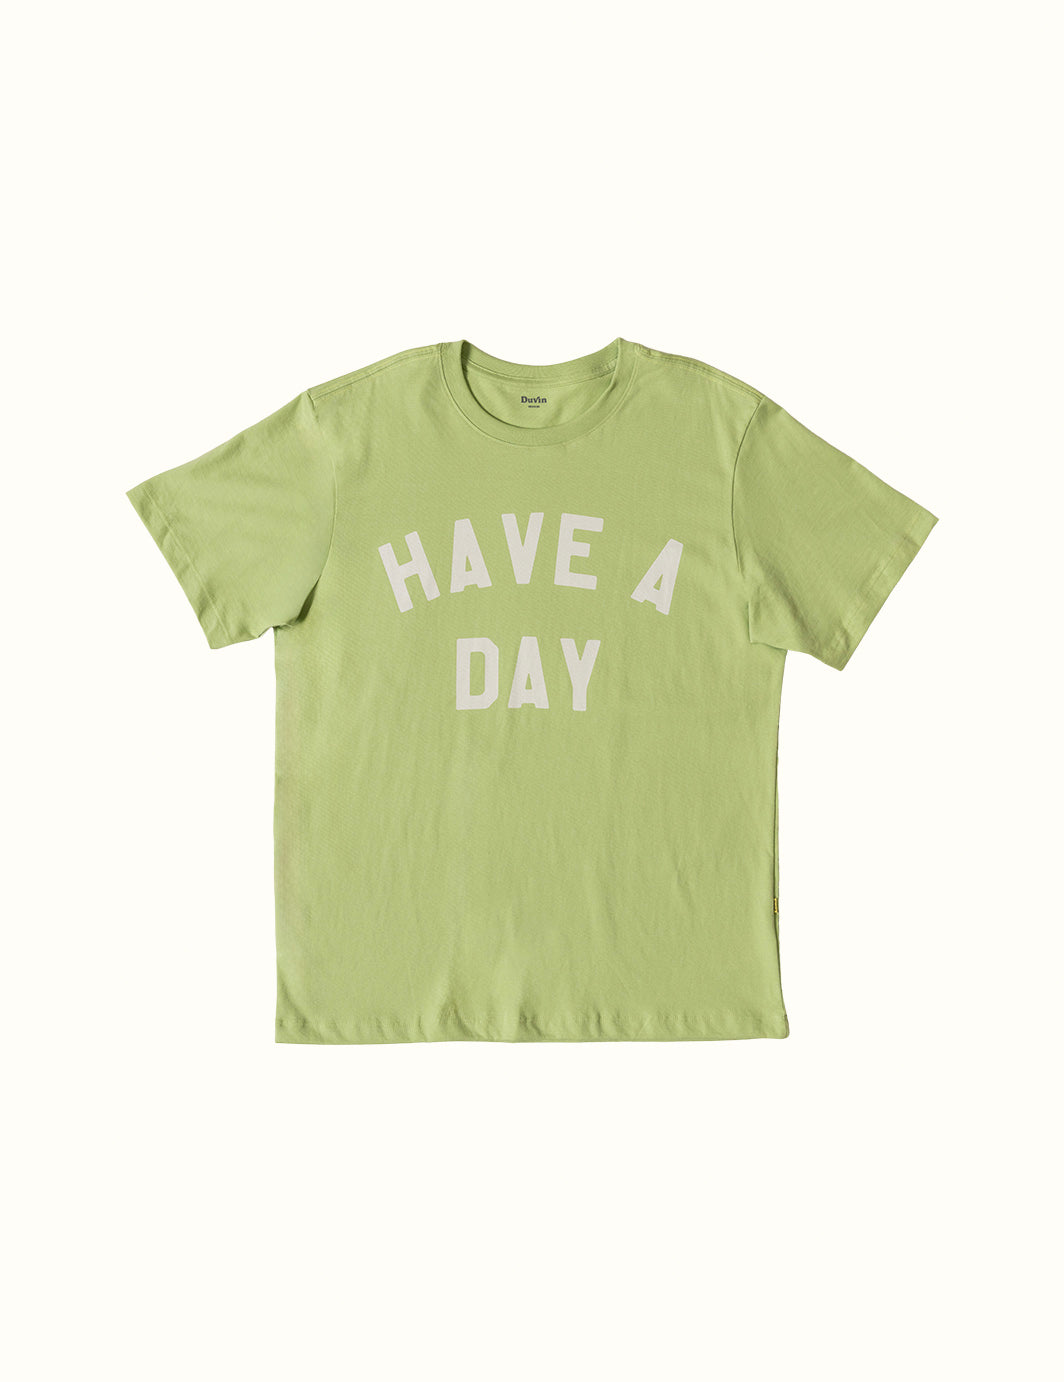 Have A Day Tee - Cactus